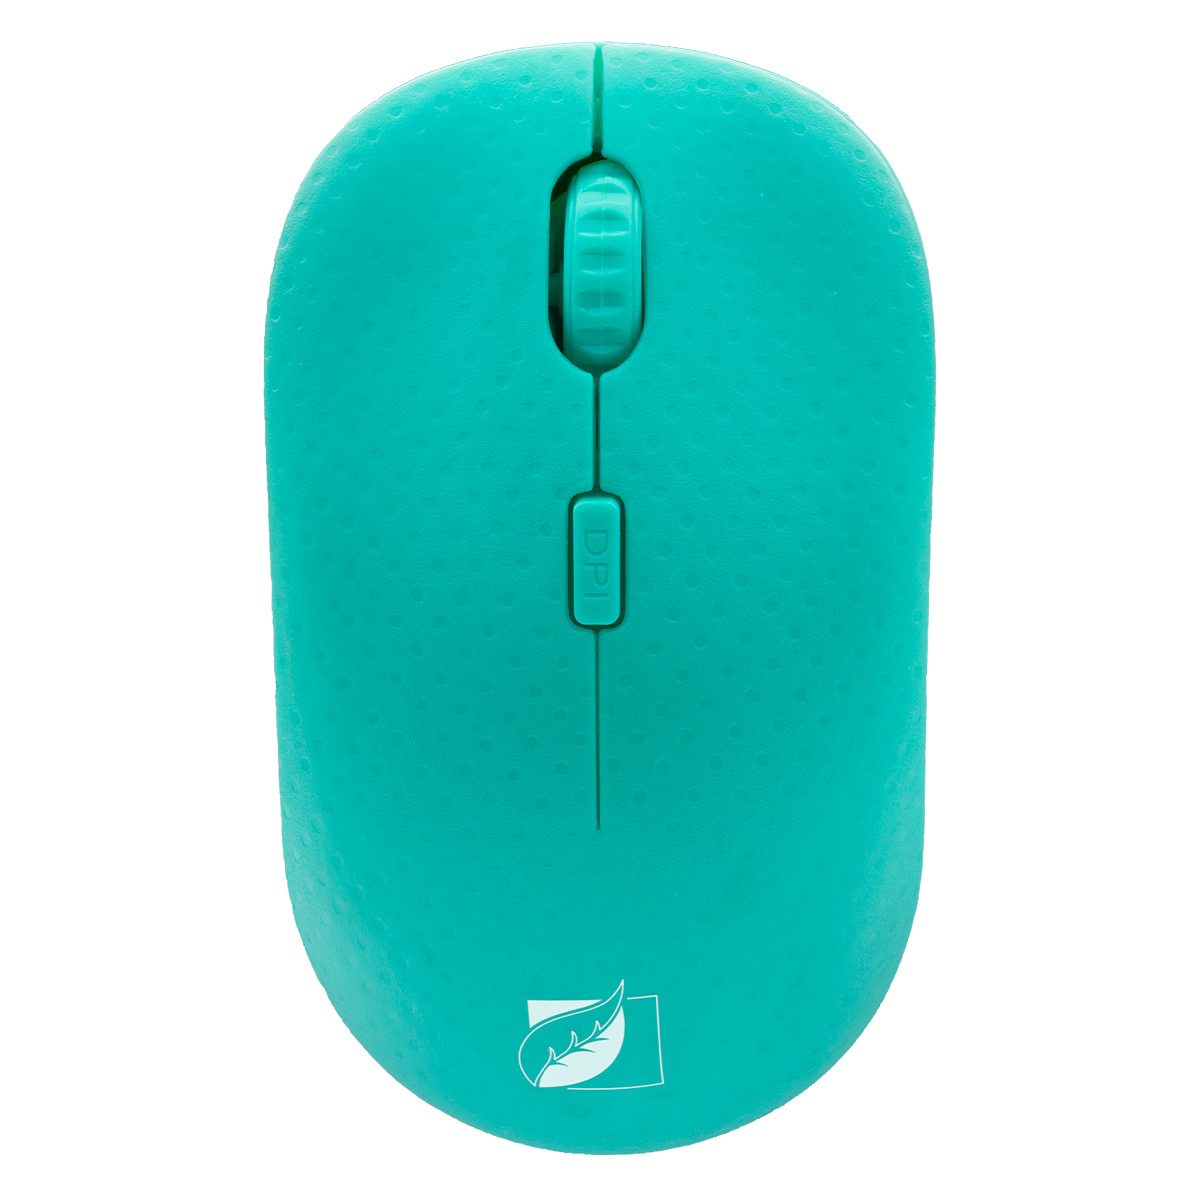 Mouse Inalámbrico Green Leaf Velocidad 1600 DPIs color azul 18-8855BL